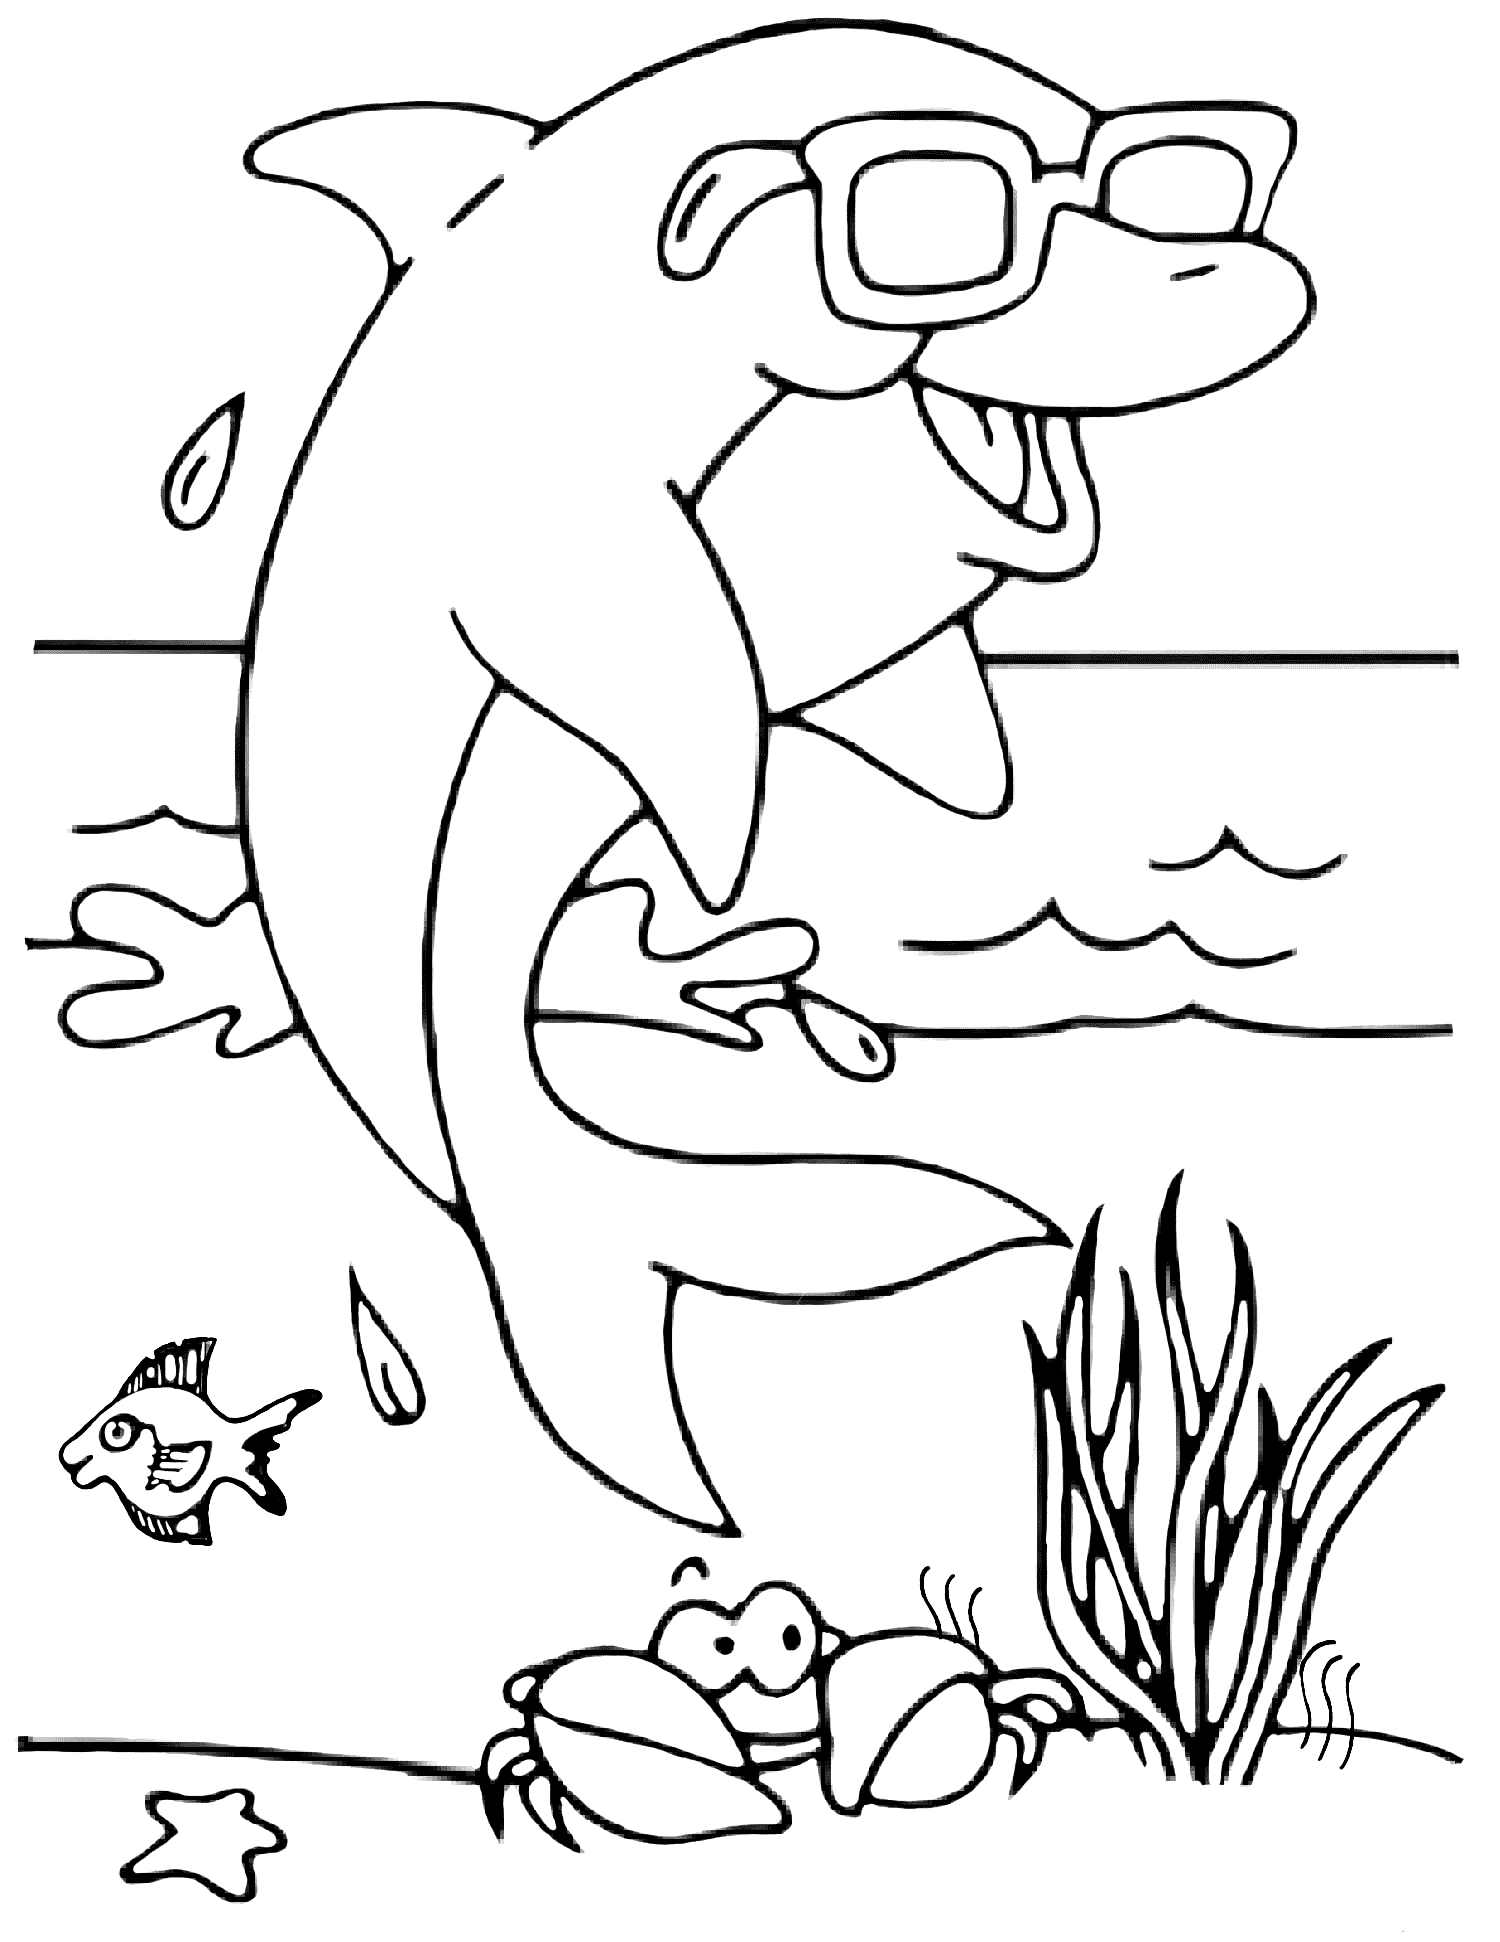 Dolphin with glasses - Animals Adult Coloring Pages